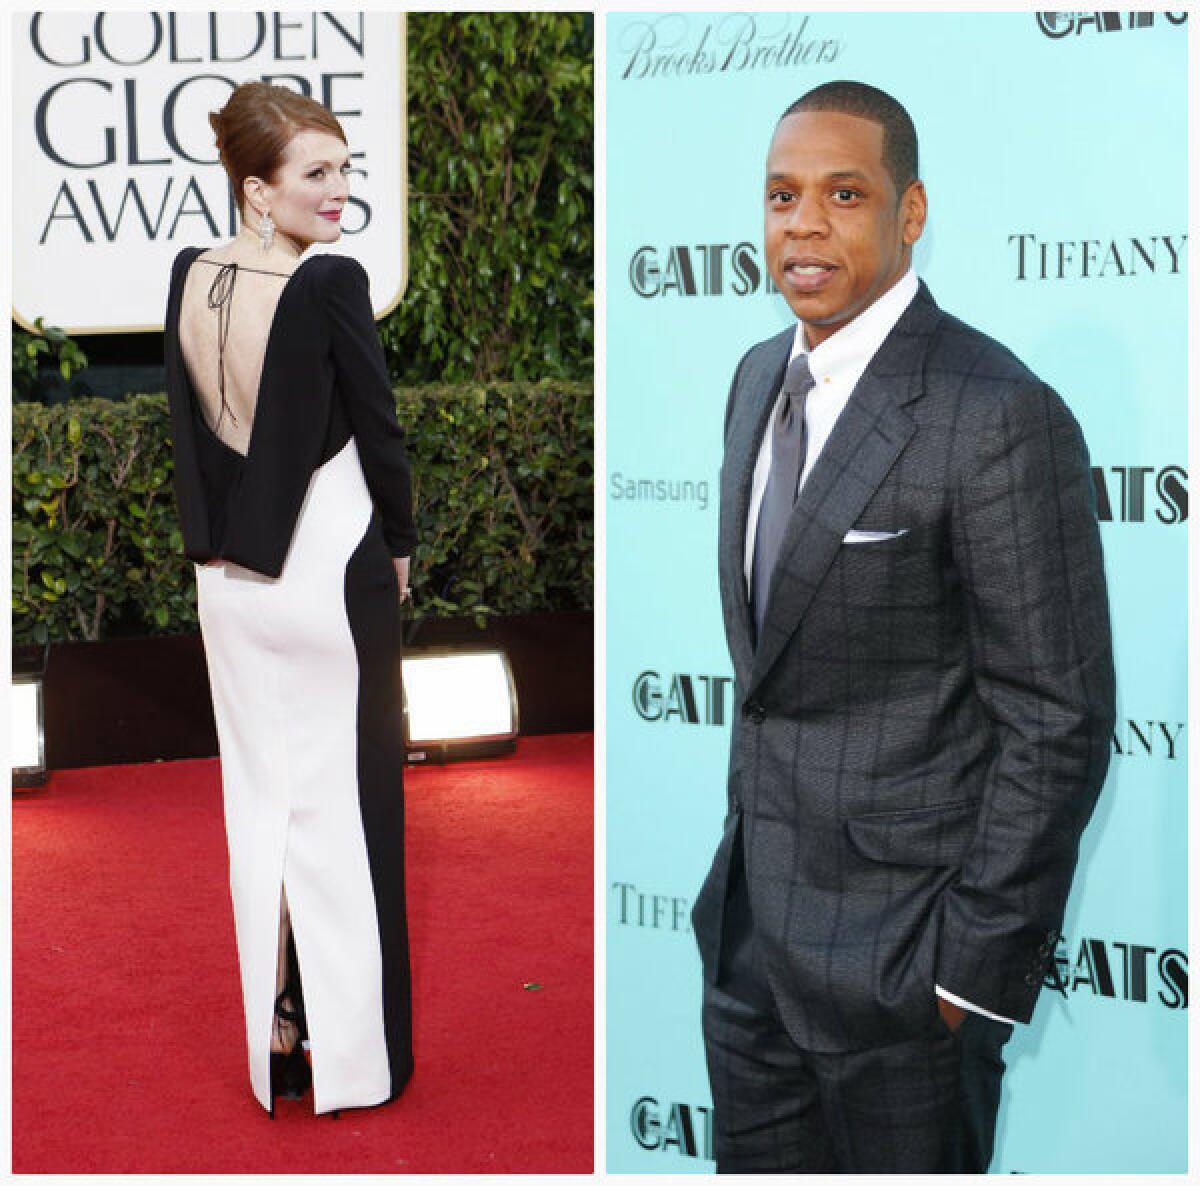 Julianne Moore in Tom Ford on the Golden Globe's red carpet in January. At right, Jay Z in Tom Ford at the premiere of "The Great Gatsby" in May. According to Yahoo, Web searches of the designer's name are up 155% over the last month and have spiked ninefold since 2012.